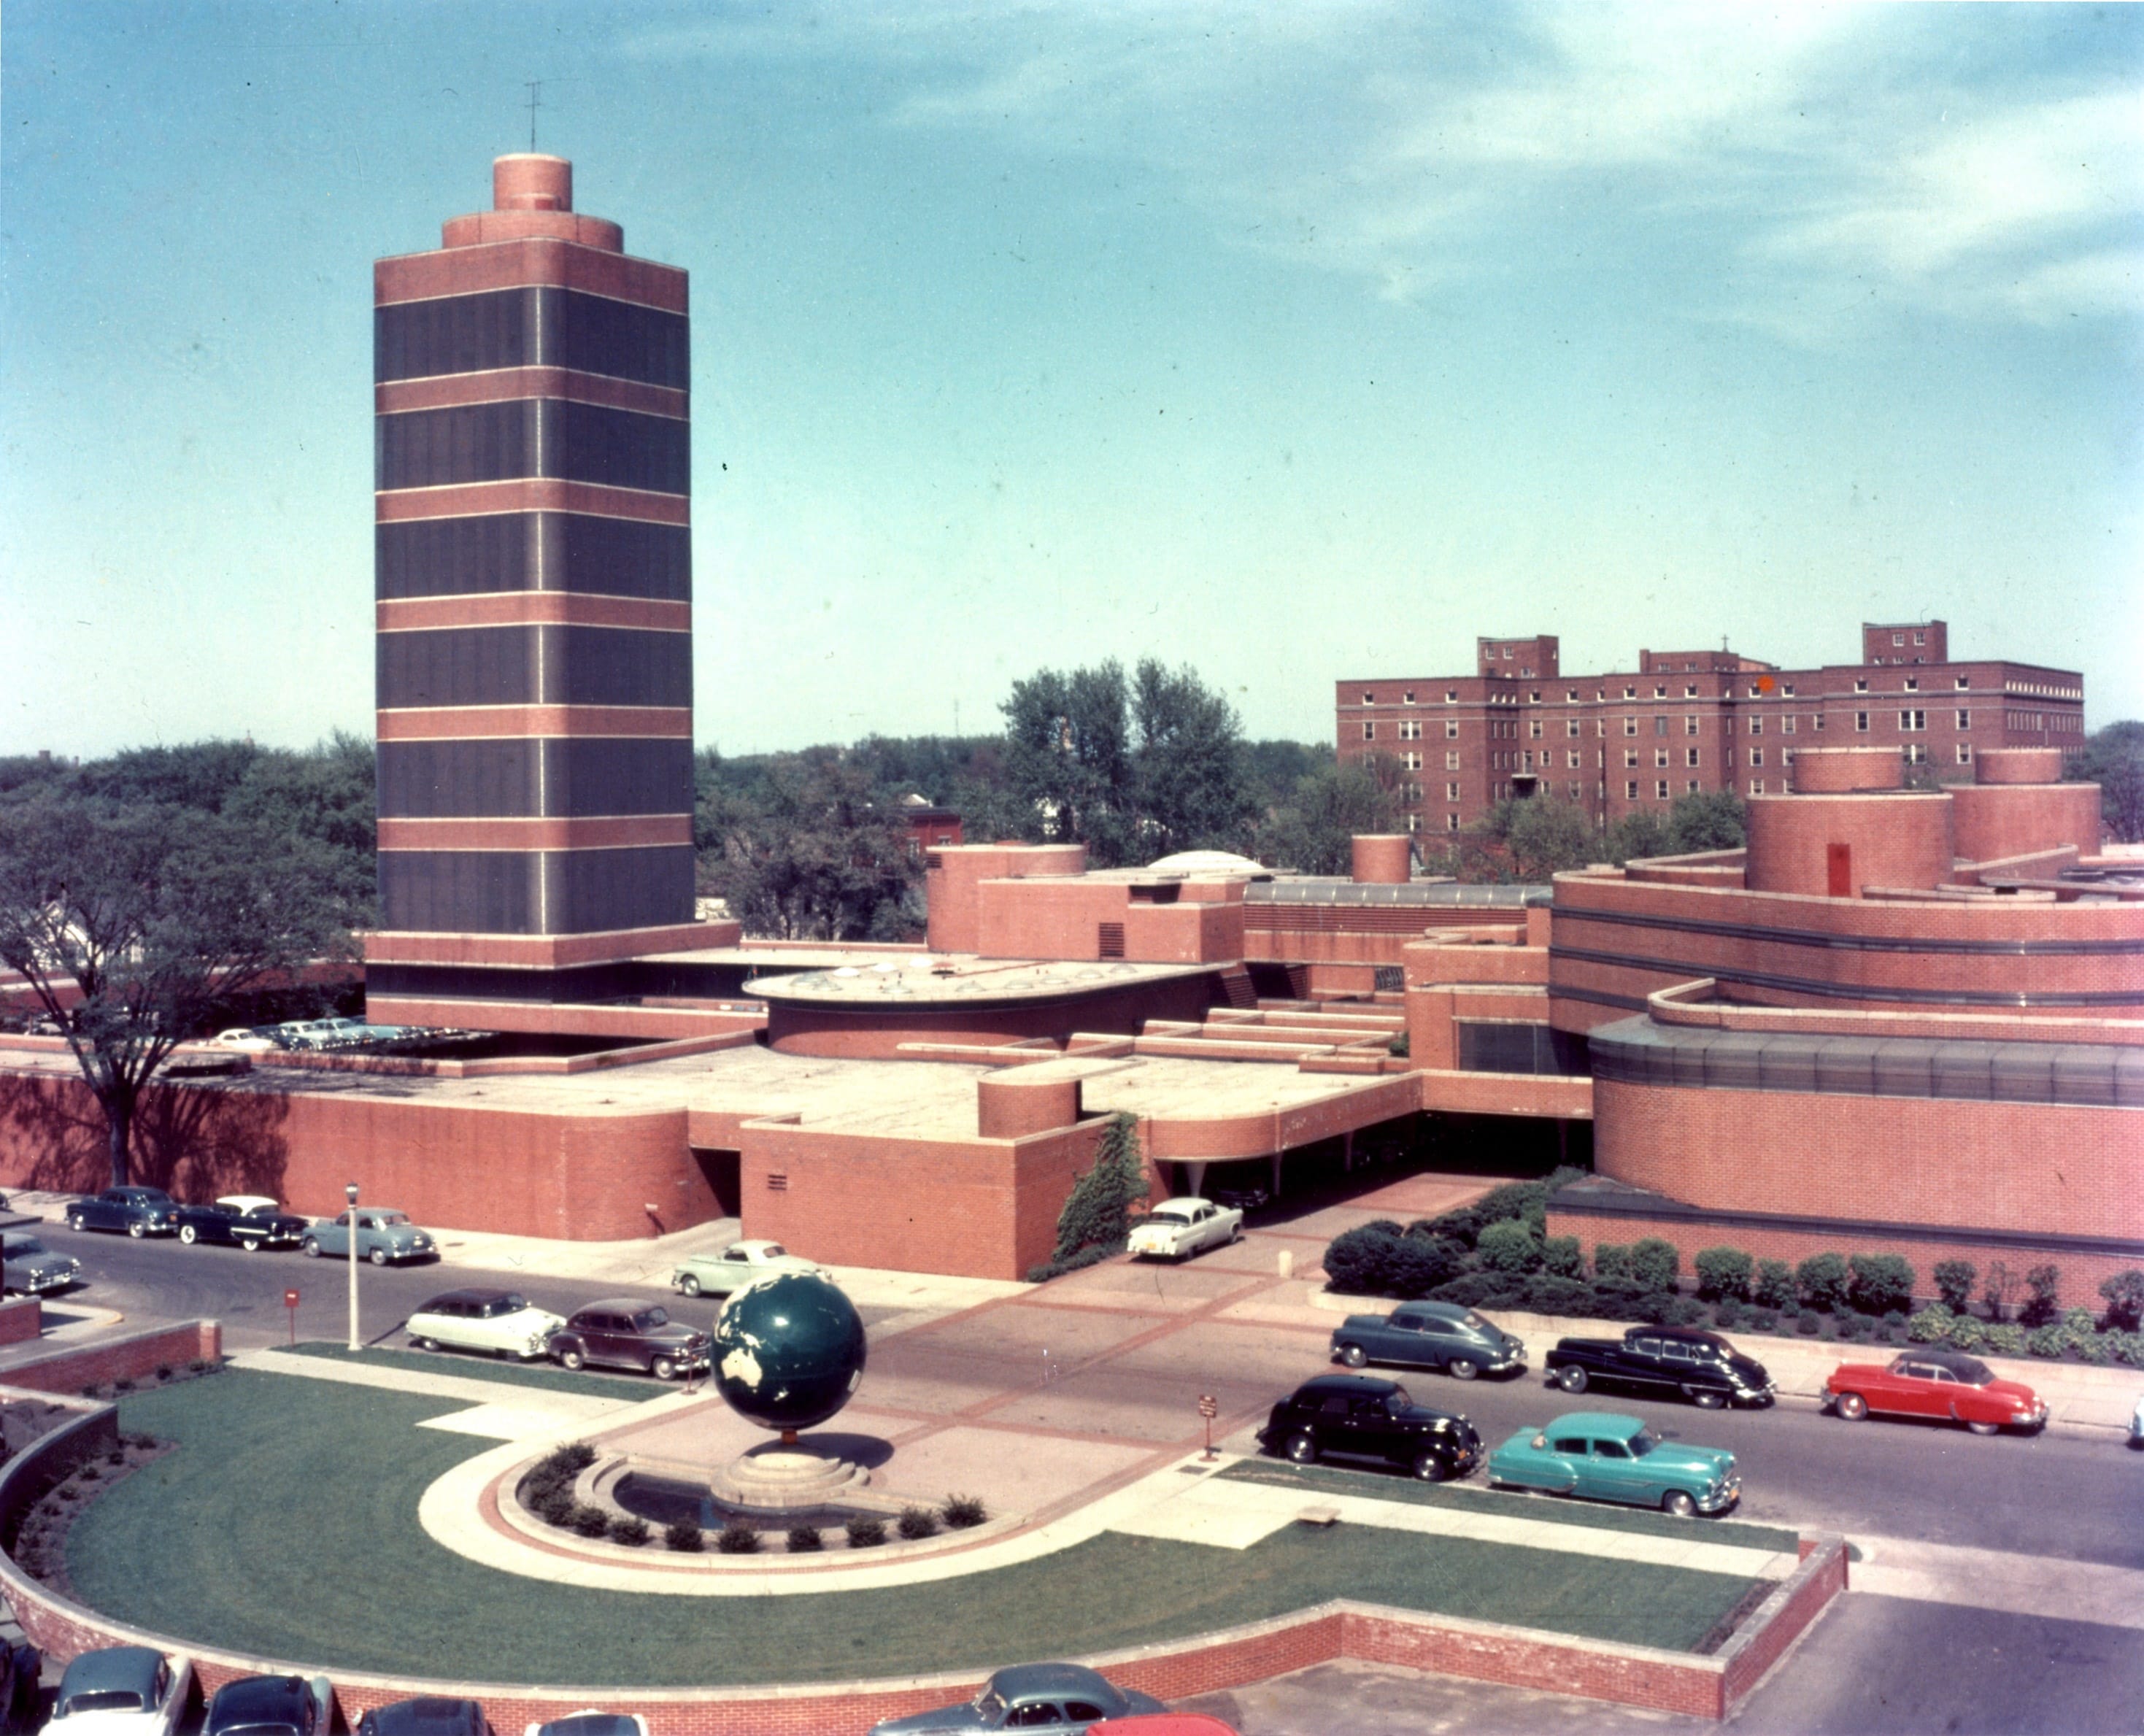 This photo taken around 1955 provides an aerial view of the SC Johnson Research Tower designed by Frank Lloyd Wright, in Racine, Wis.